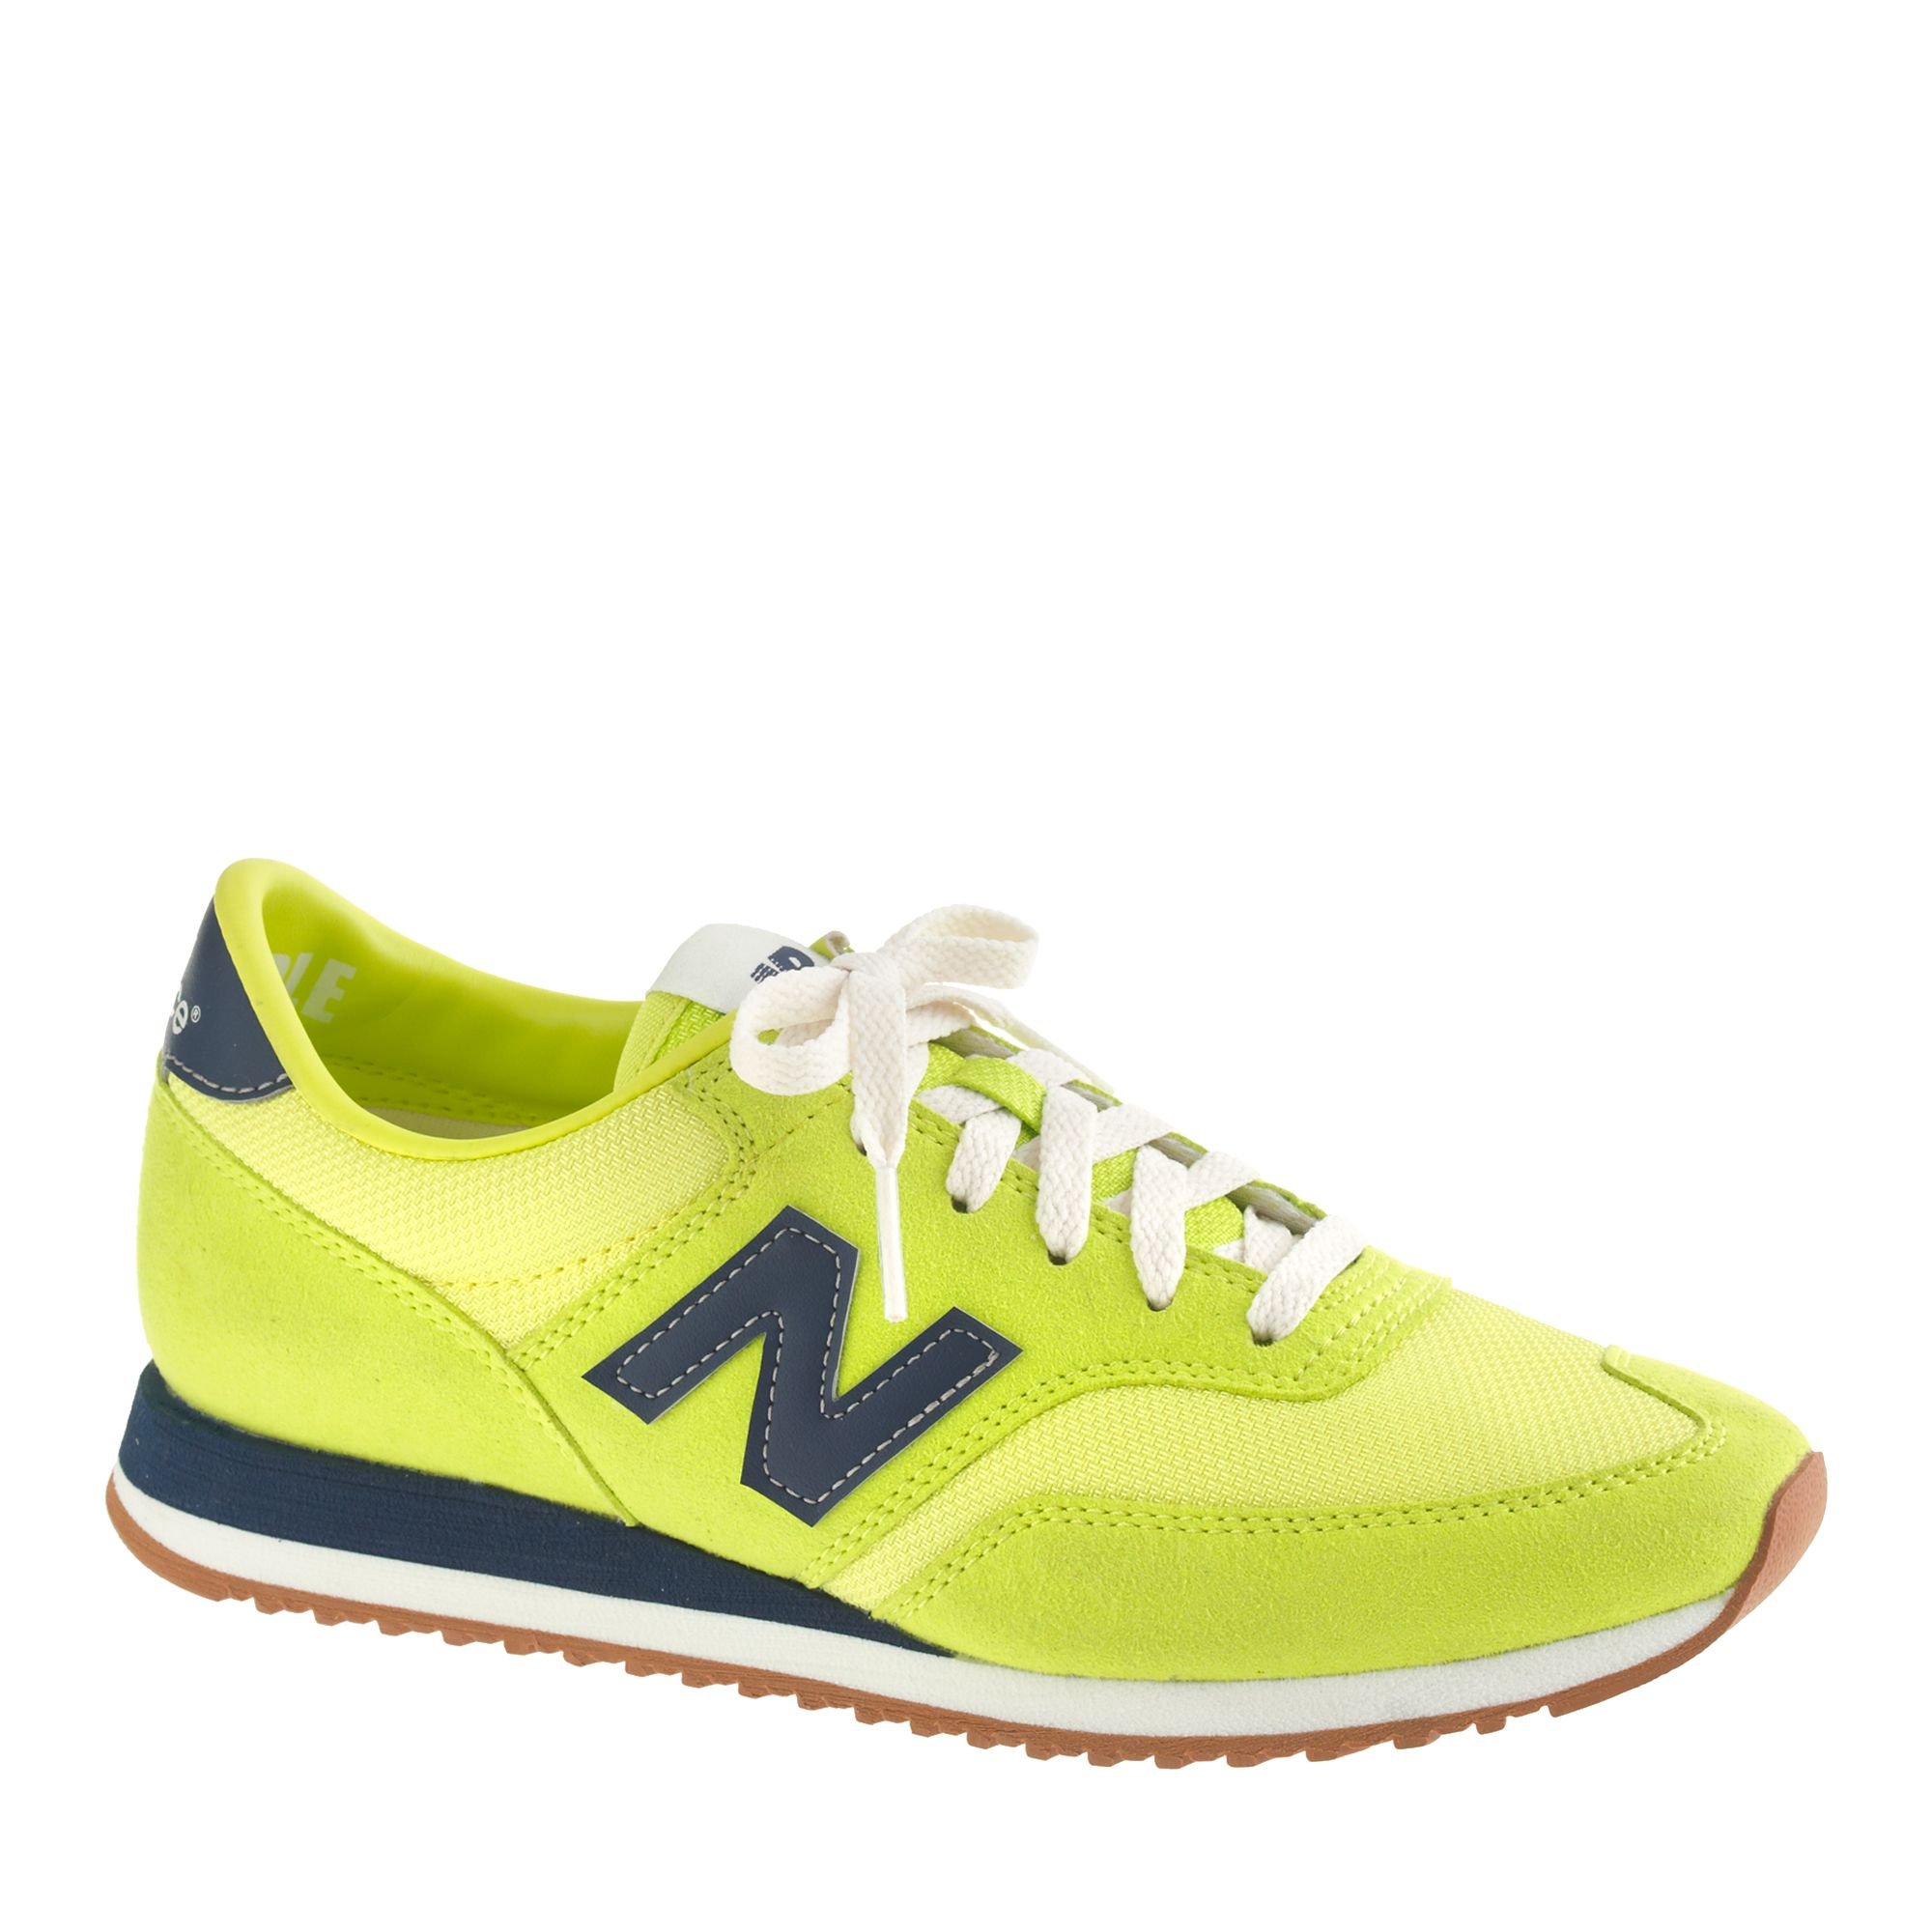 New Balance Womens New Balance For 620 Sneakers in Yellow